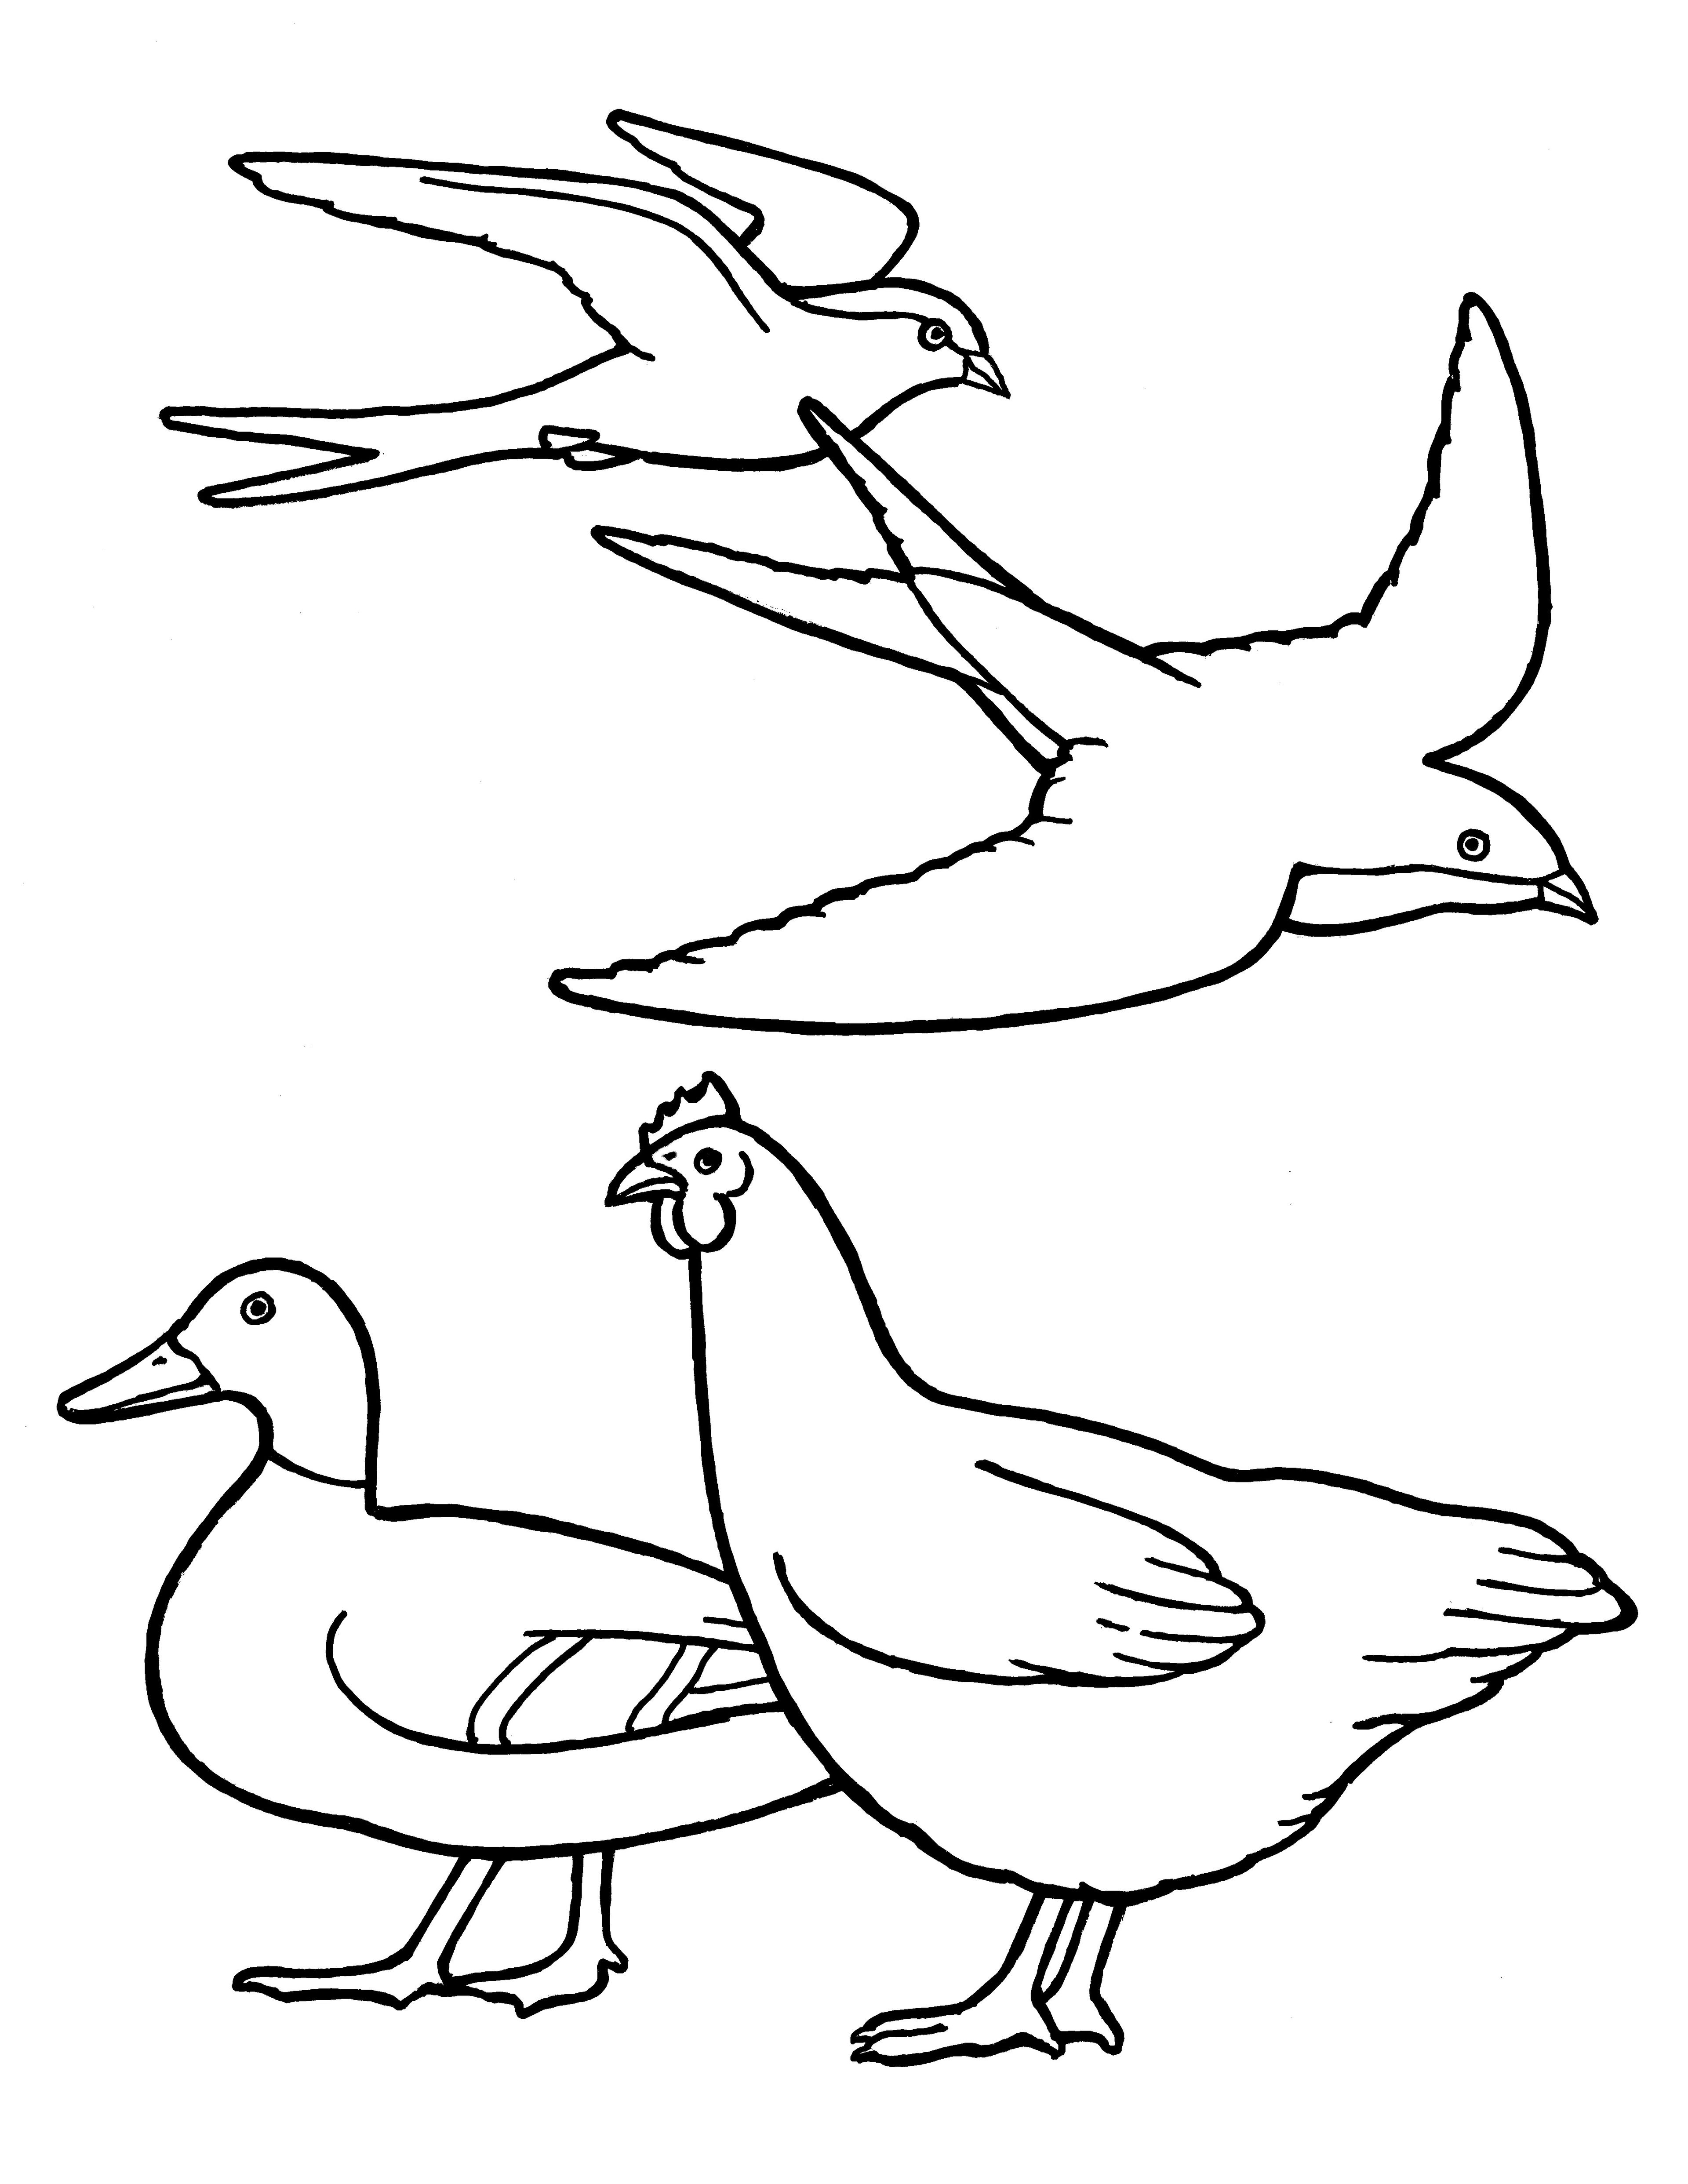 A line drawing of birds from the nursery manual Behold Your Little Ones (2008), page 35.